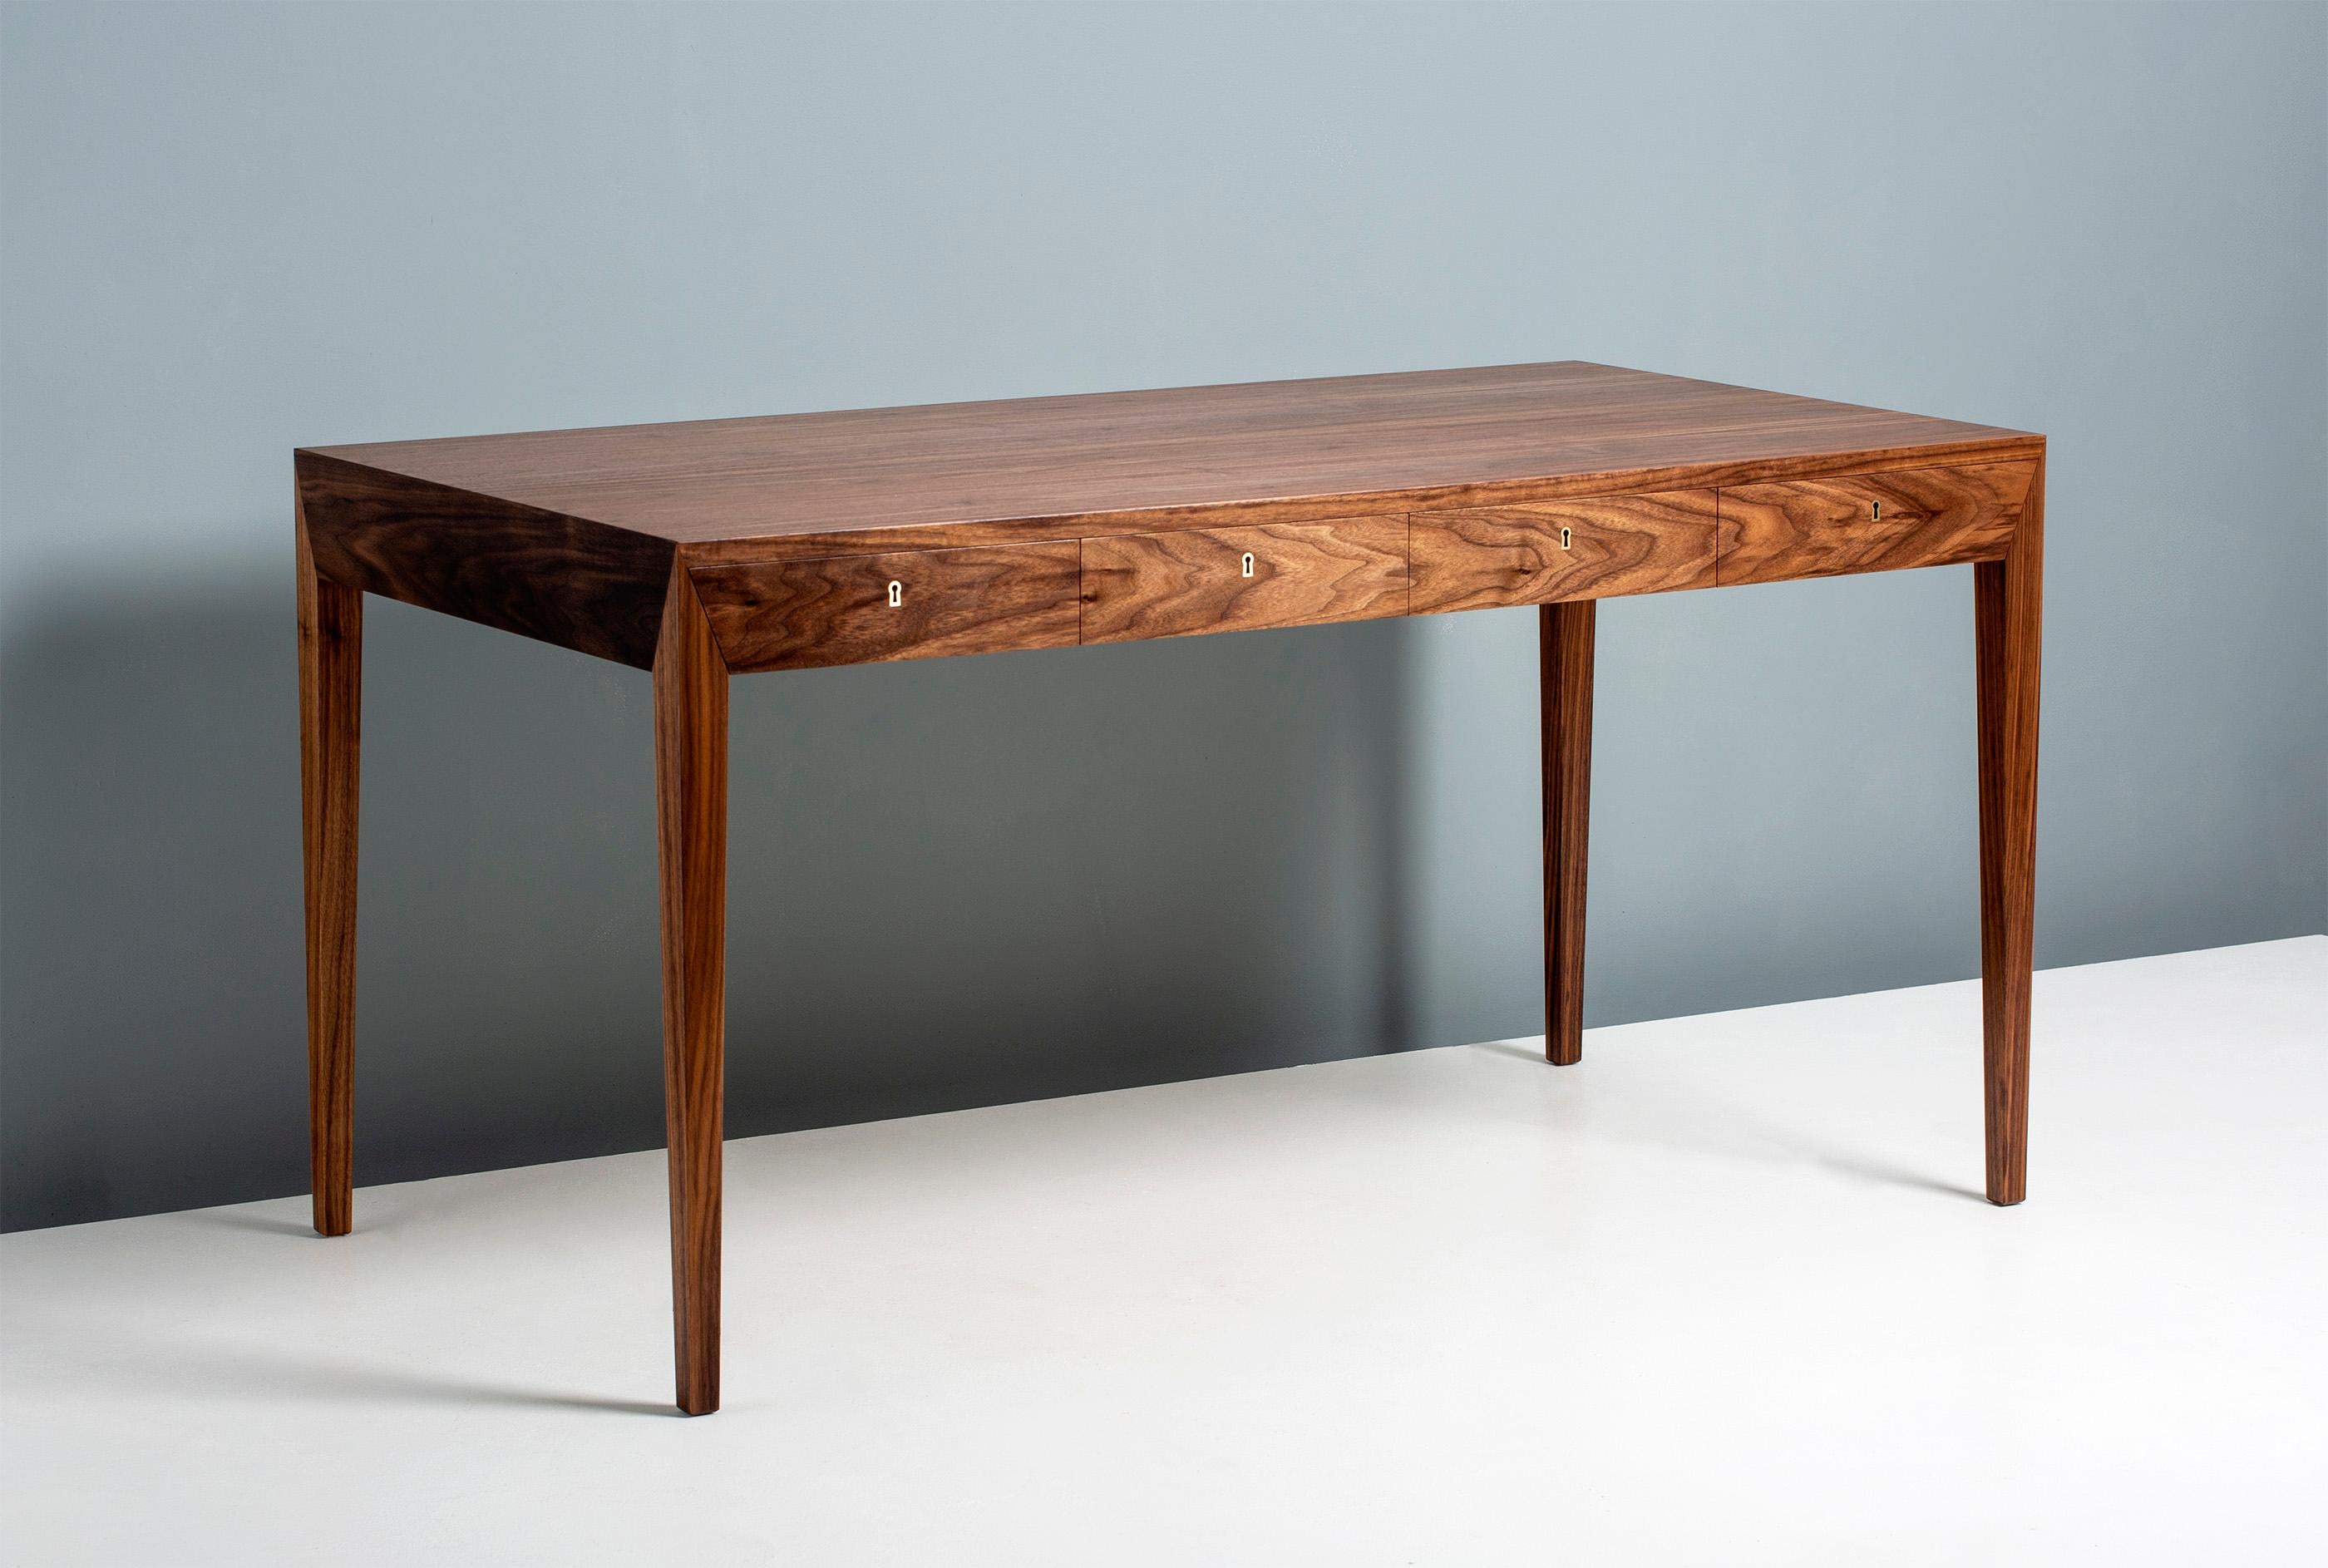 The iconic Model 36 desk from Danish designer Severin Hansen was designed in 1958 and exhibited at the annual Cabinetmaker’s Guild Exhibition in Copenhagen in the same year. It went on to become one of the most sought-after and recognised desks from